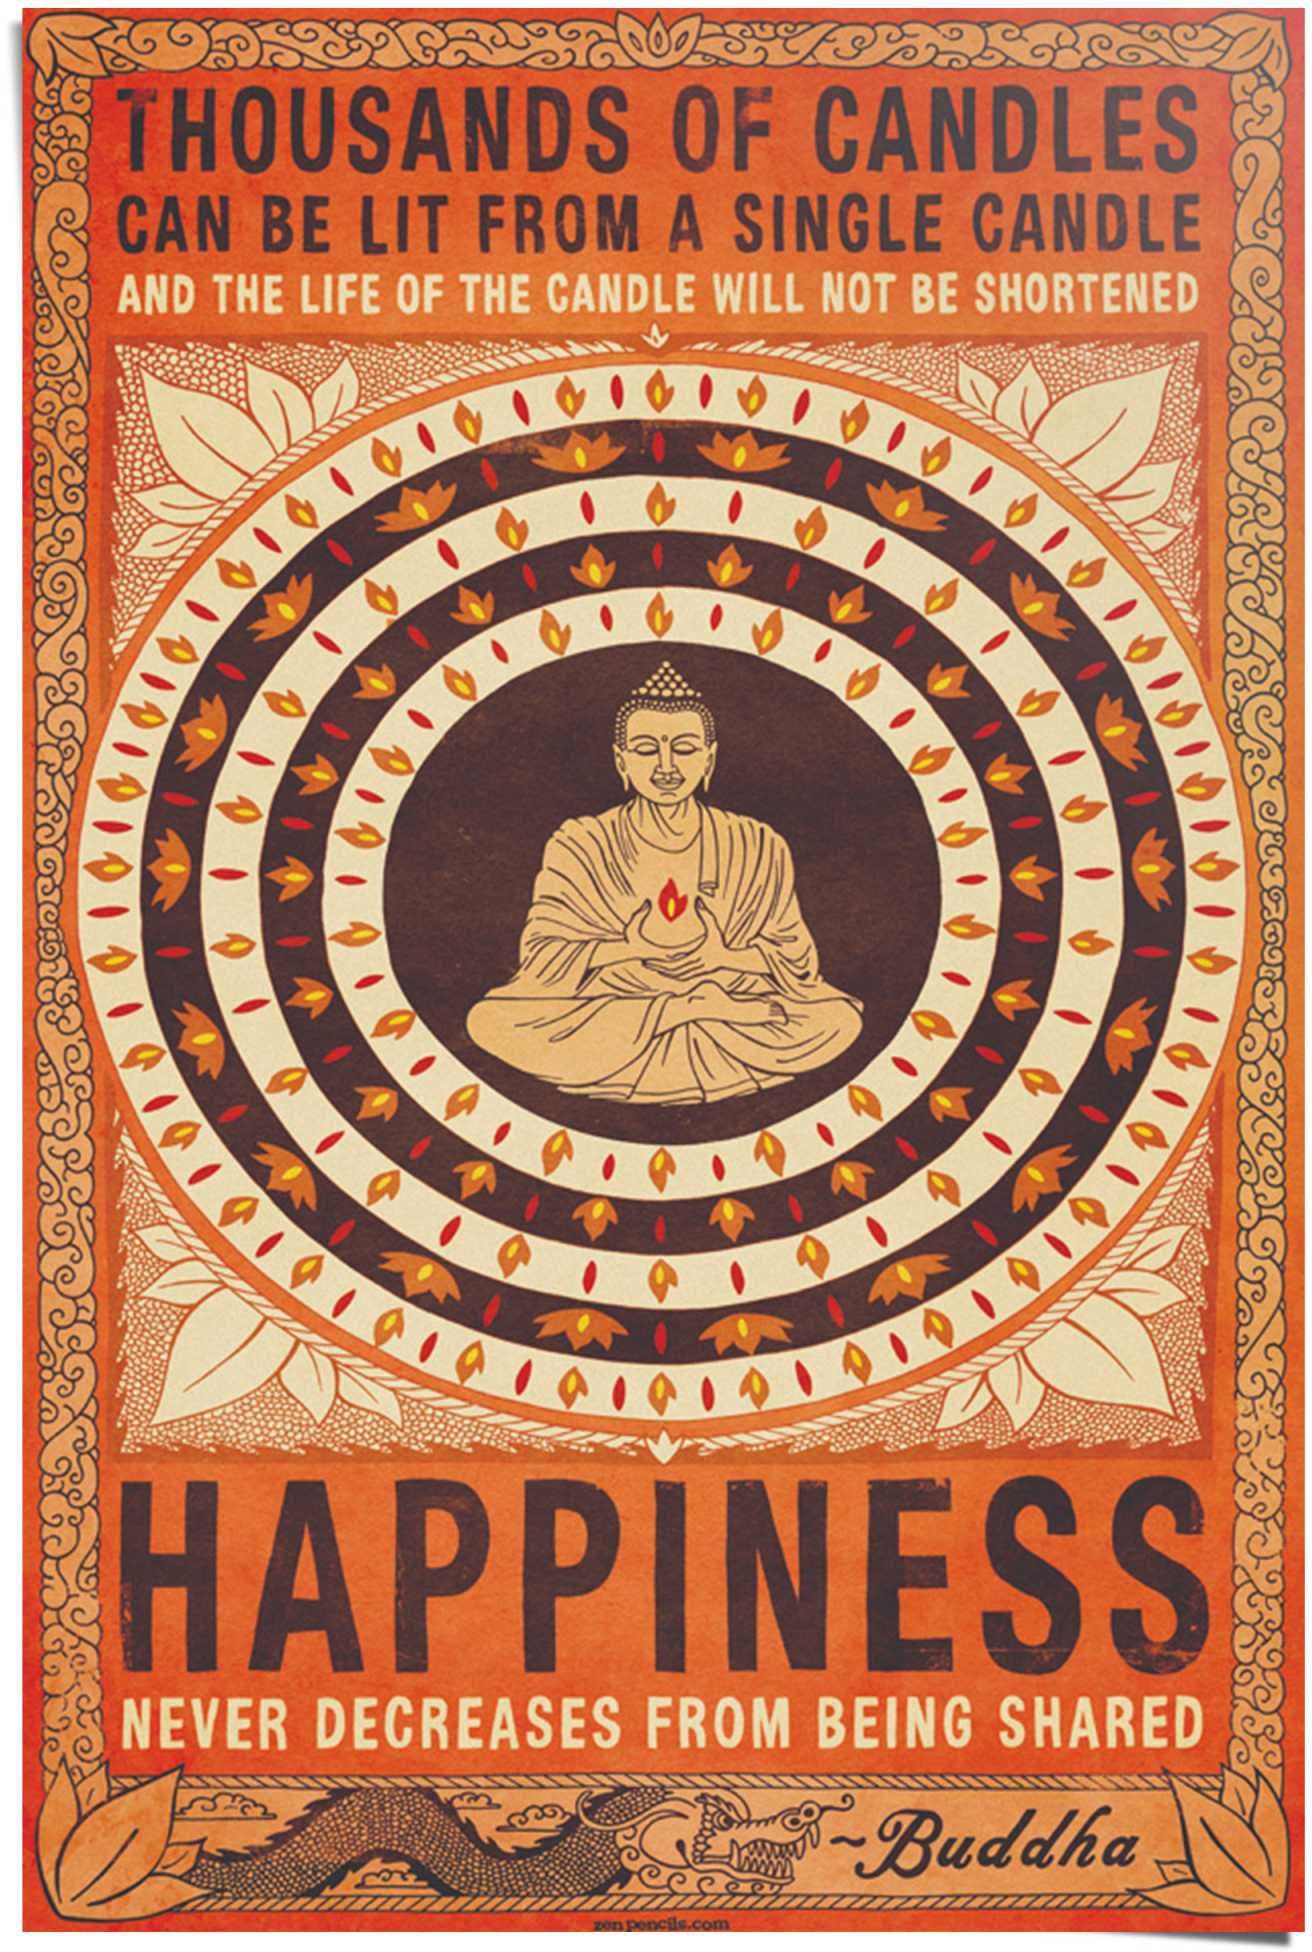 Reinders! Poster St) Happiness, Buddha (1